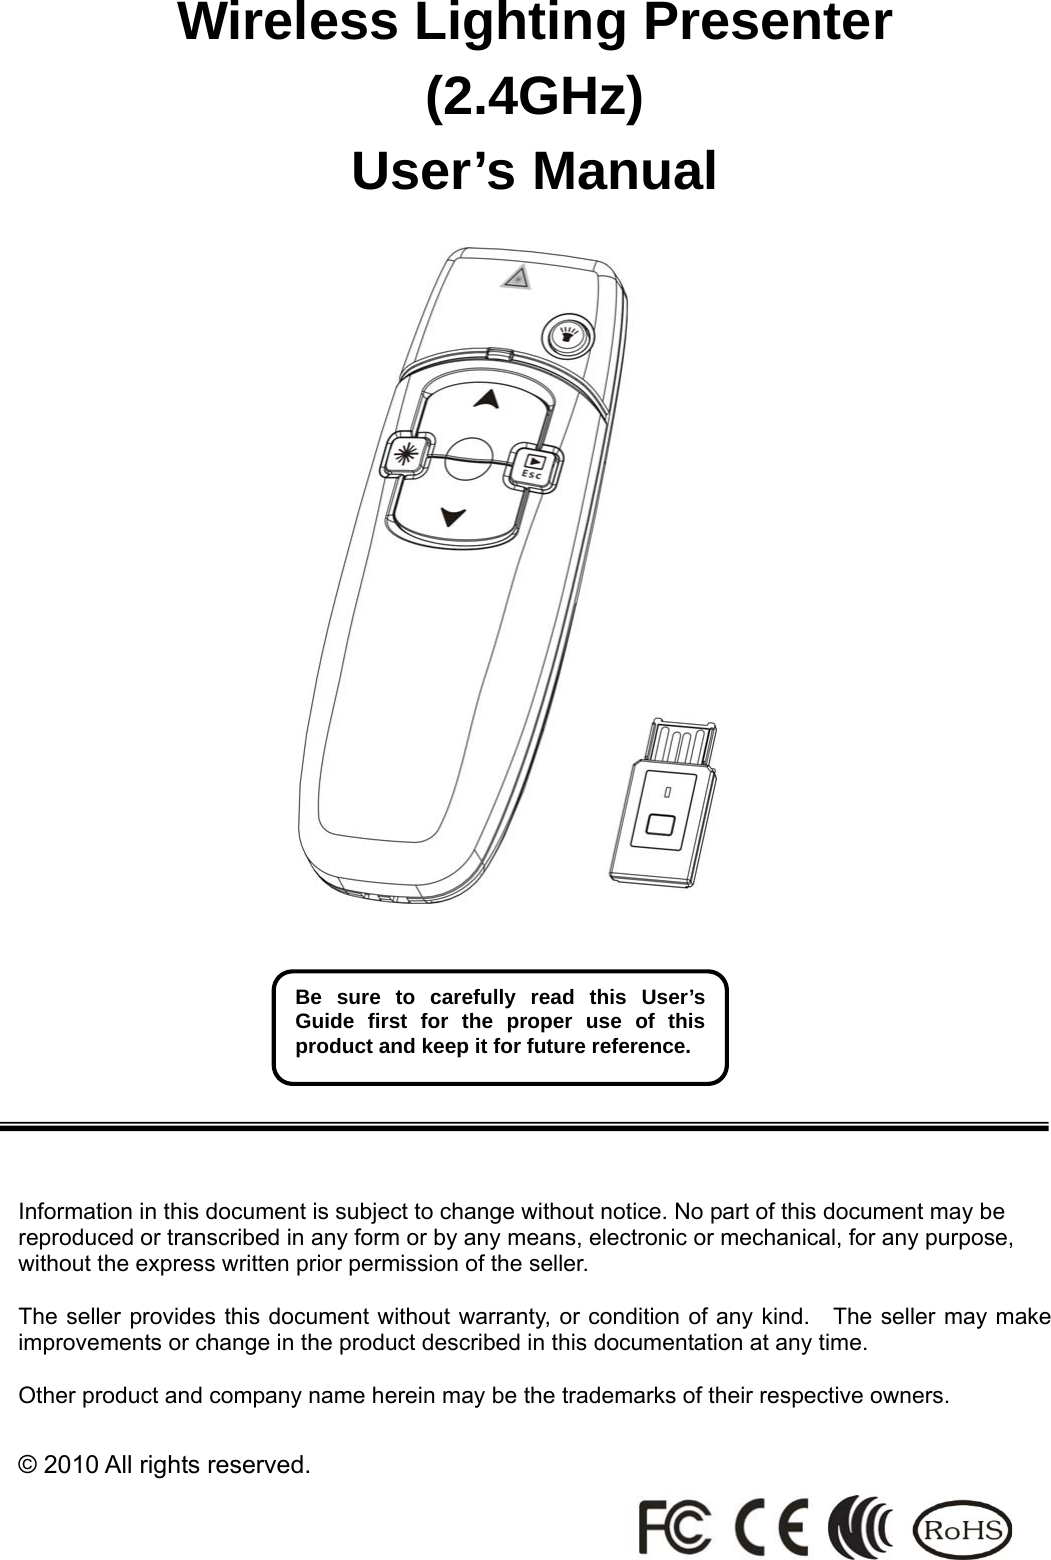 Wireless Lighting Presenter (2.4GHz) User’s Manual                                                      Information in this document is subject to change without notice. No part of this document may be reproduced or transcribed in any form or by any means, electronic or mechanical, for any purpose, without the express written prior permission of the seller.  The seller provides this document without warranty, or condition of any kind.    The seller may make improvements or change in the product described in this documentation at any time.  Other product and company name herein may be the trademarks of their respective owners.  © 2010 All rights reserved.   Be sure to carefully read this User’s Guide first for the proper use of this product and keep it for future reference. 